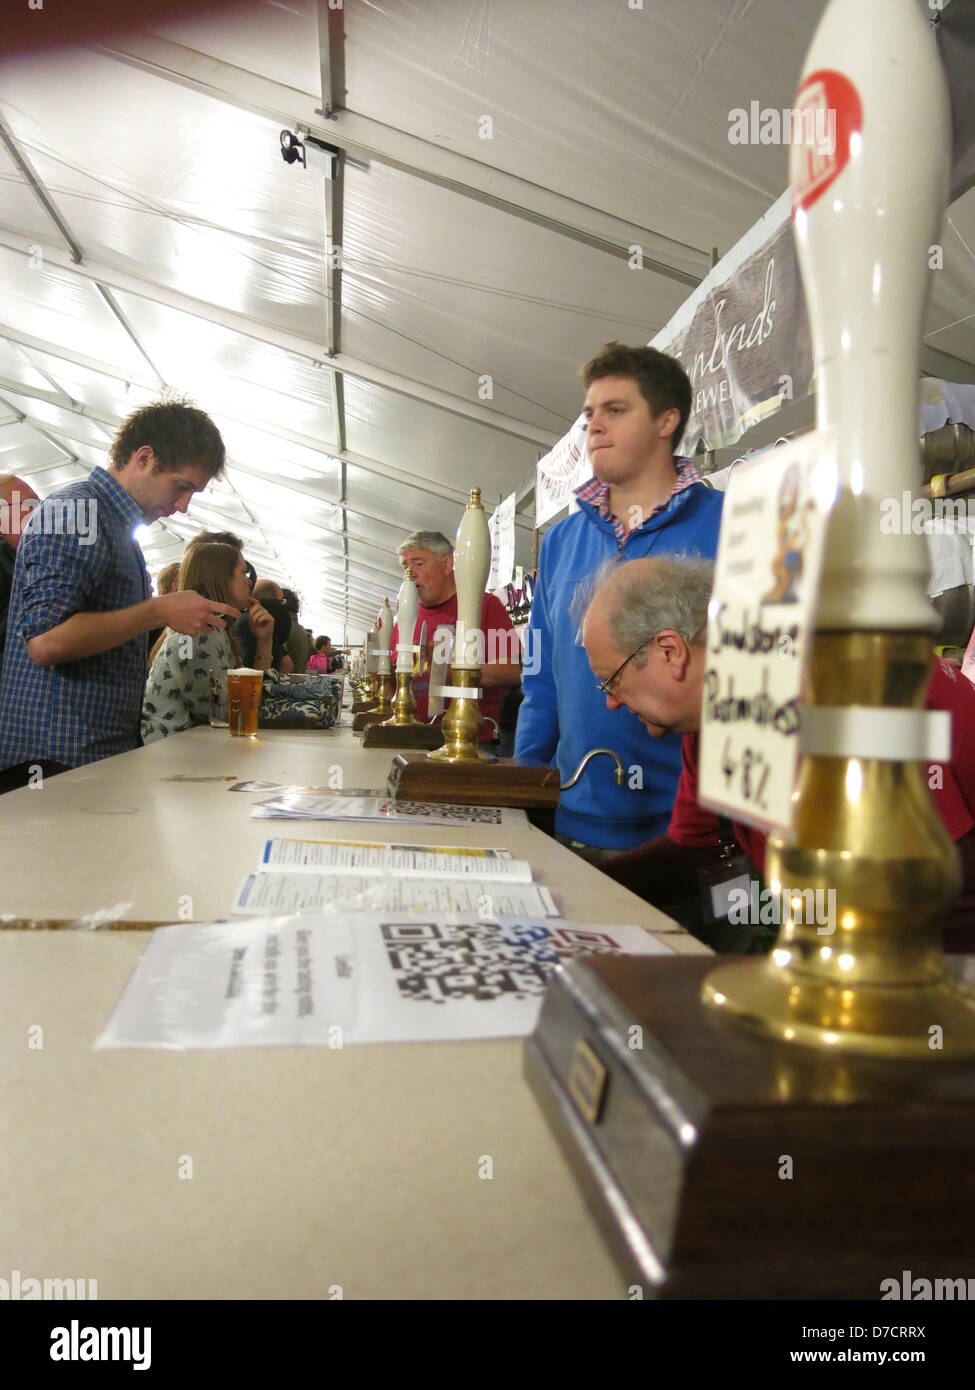 Reading, Berkshire, UK. 3rd May 2013. Celebrating it's 19th year, the Reading Beer & Cider Festival running from Thursday 2nd to Sunday 5th May, welcomes habitual drinkers and new comers alike.    Old friendships are rekindled and new friends made whilst listening to live music, tasting great food and of course sampling some of the 550 real ales, and 150 ciders and perries, on offer. Credit:  Sarah Tubb / Alamy Live News Stock Photo